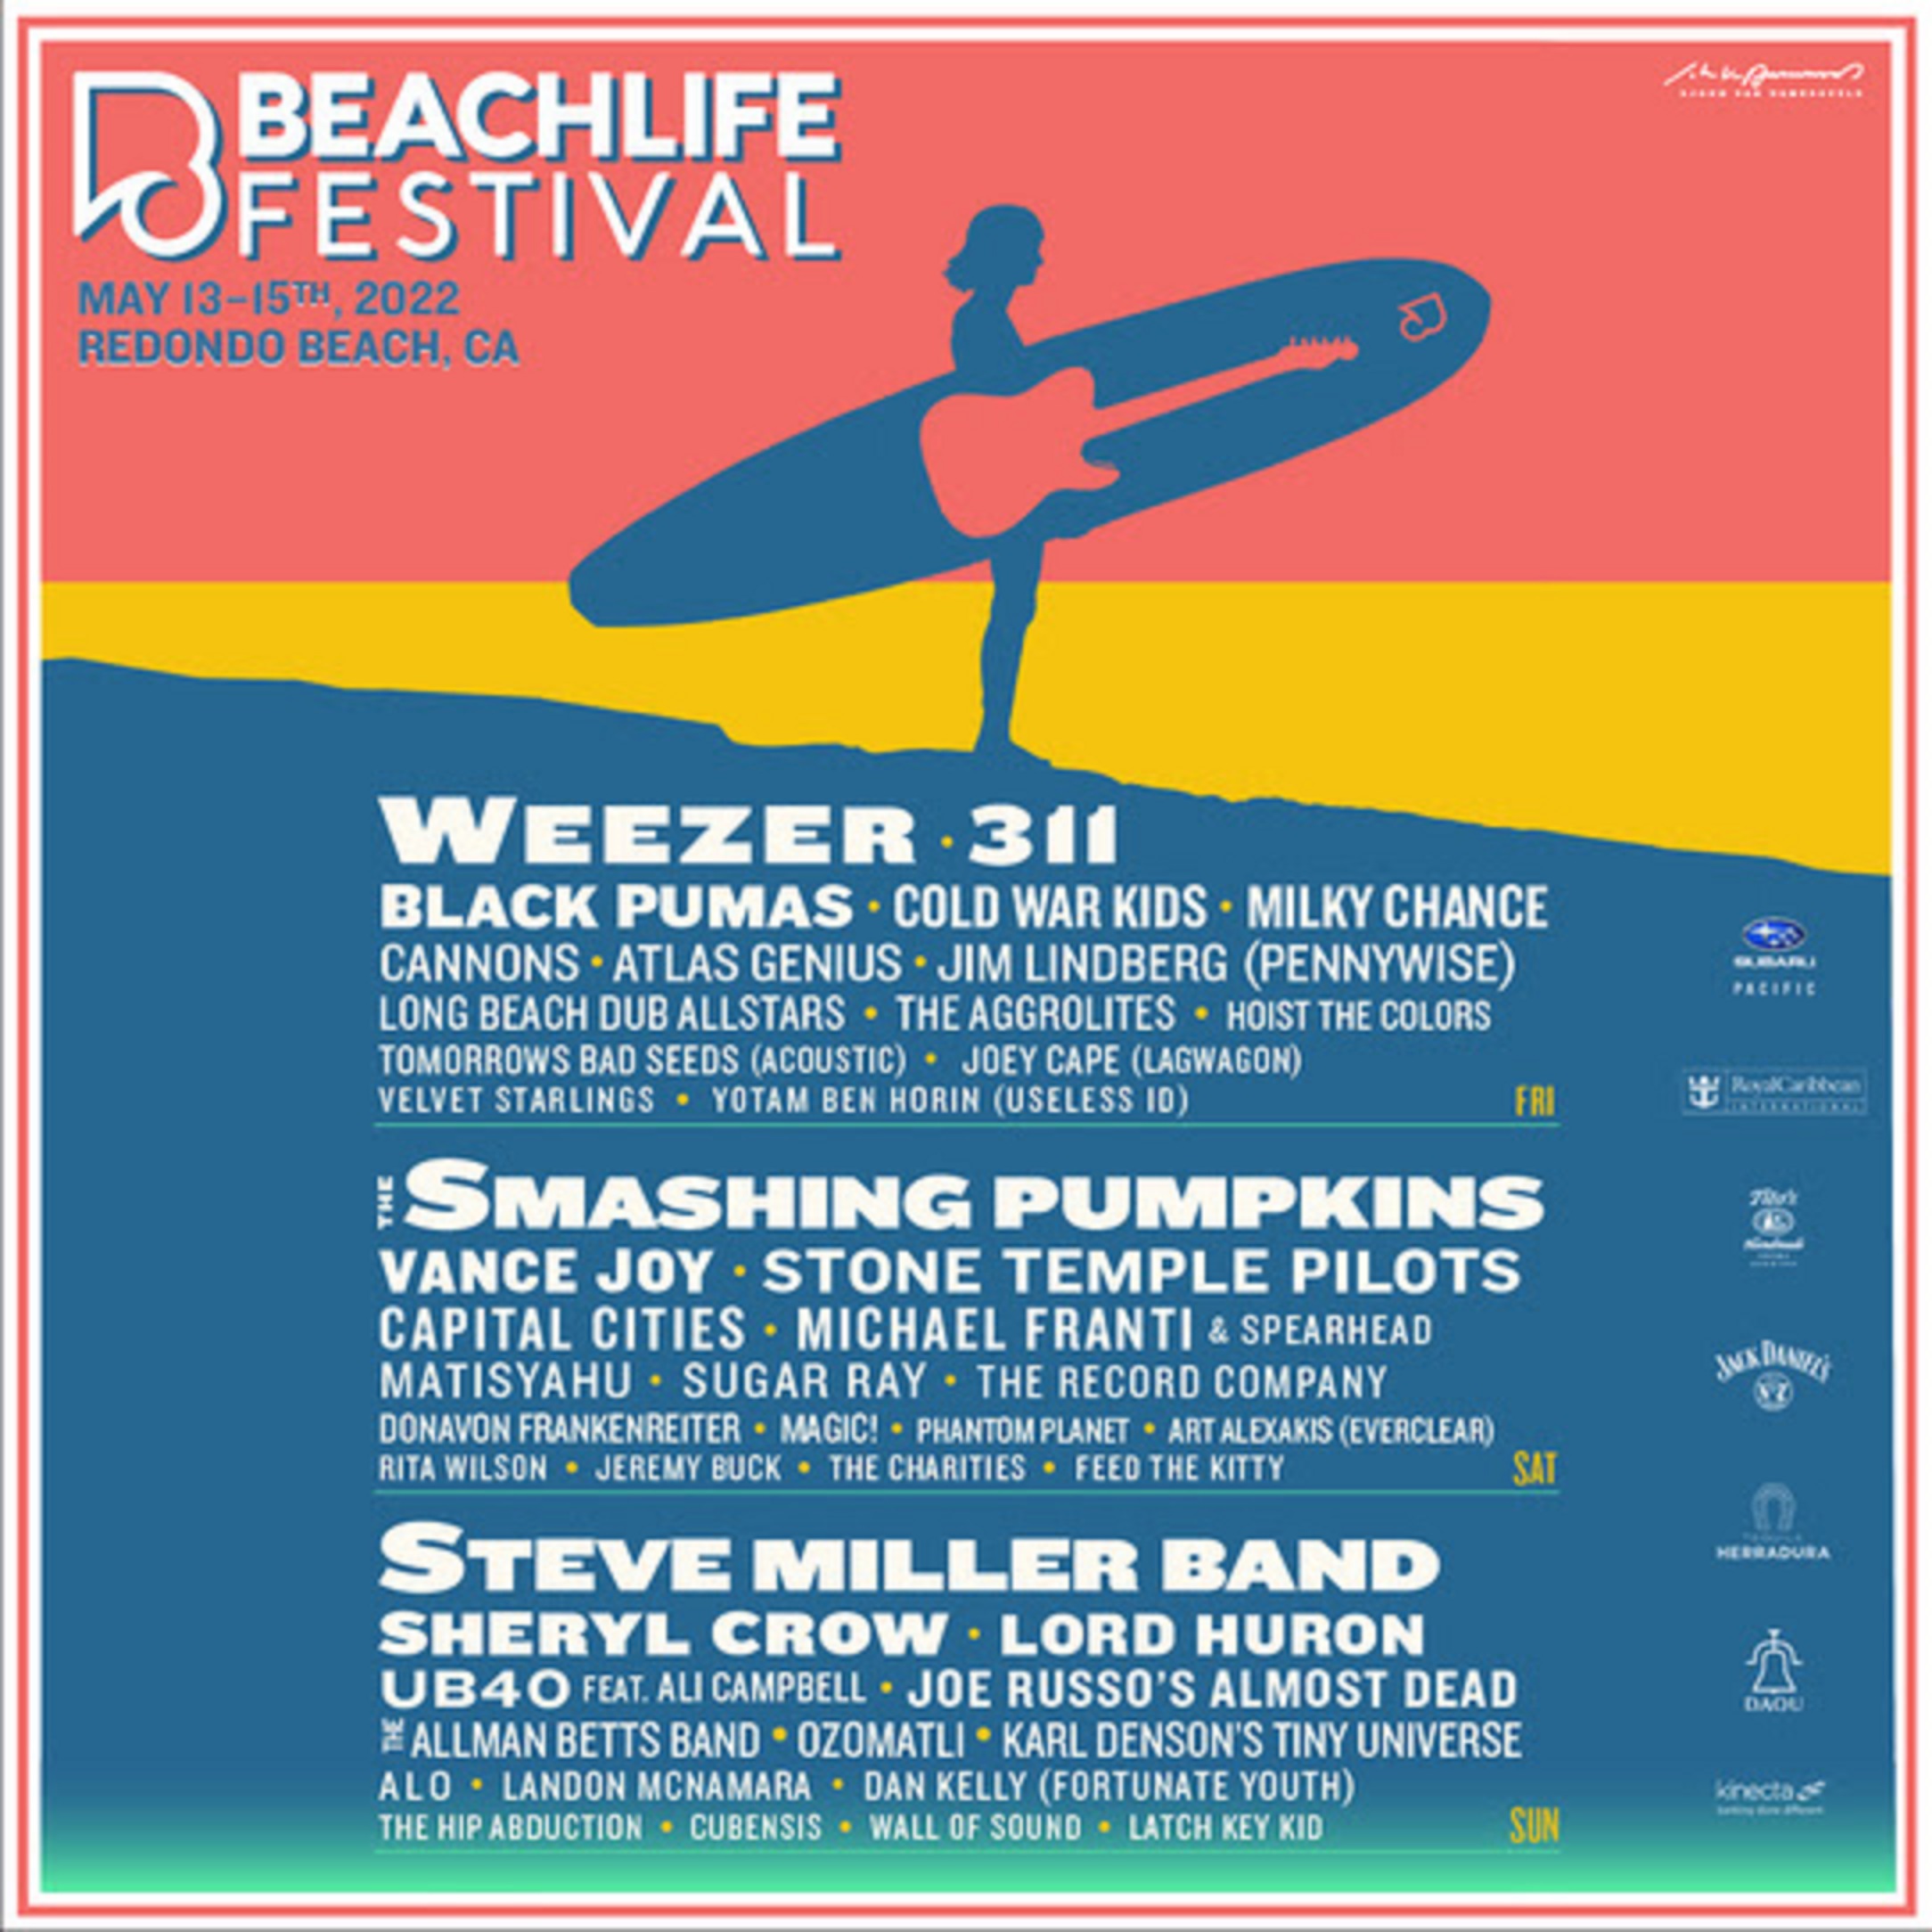 BeachLife Festival Announces Eclectic Lineup Of Renowned Music Artists 